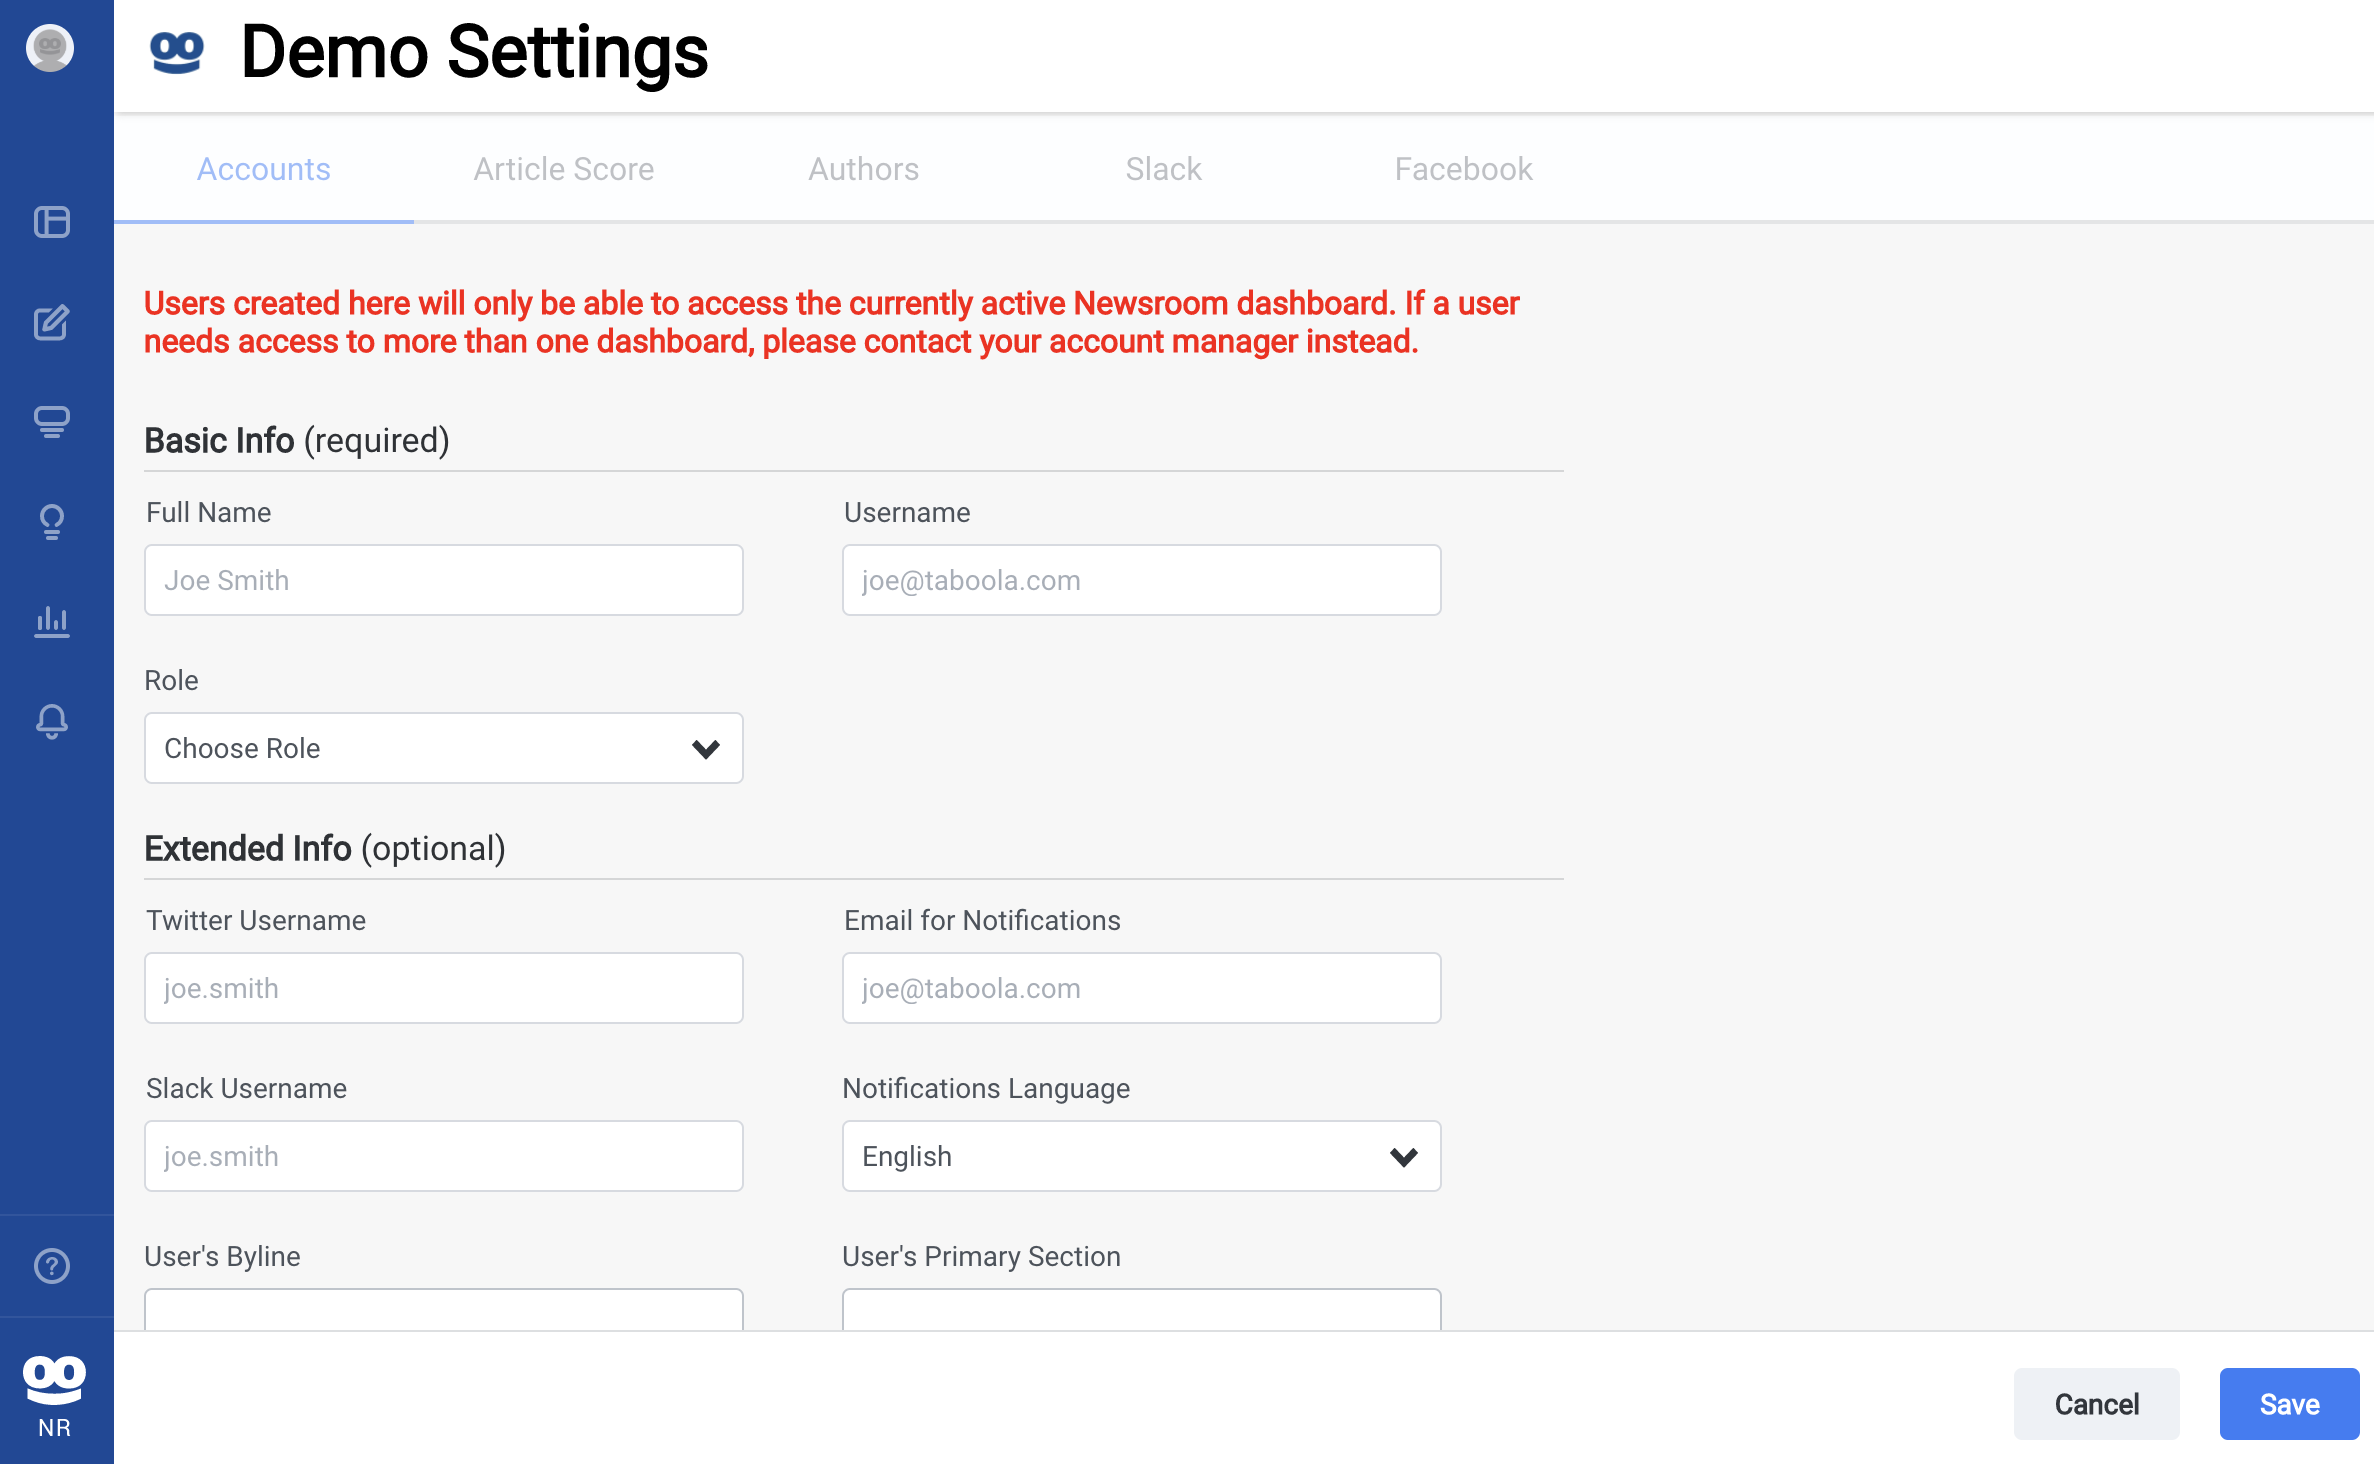 How to Add User Accounts, Change User Roles, and Manage Users.